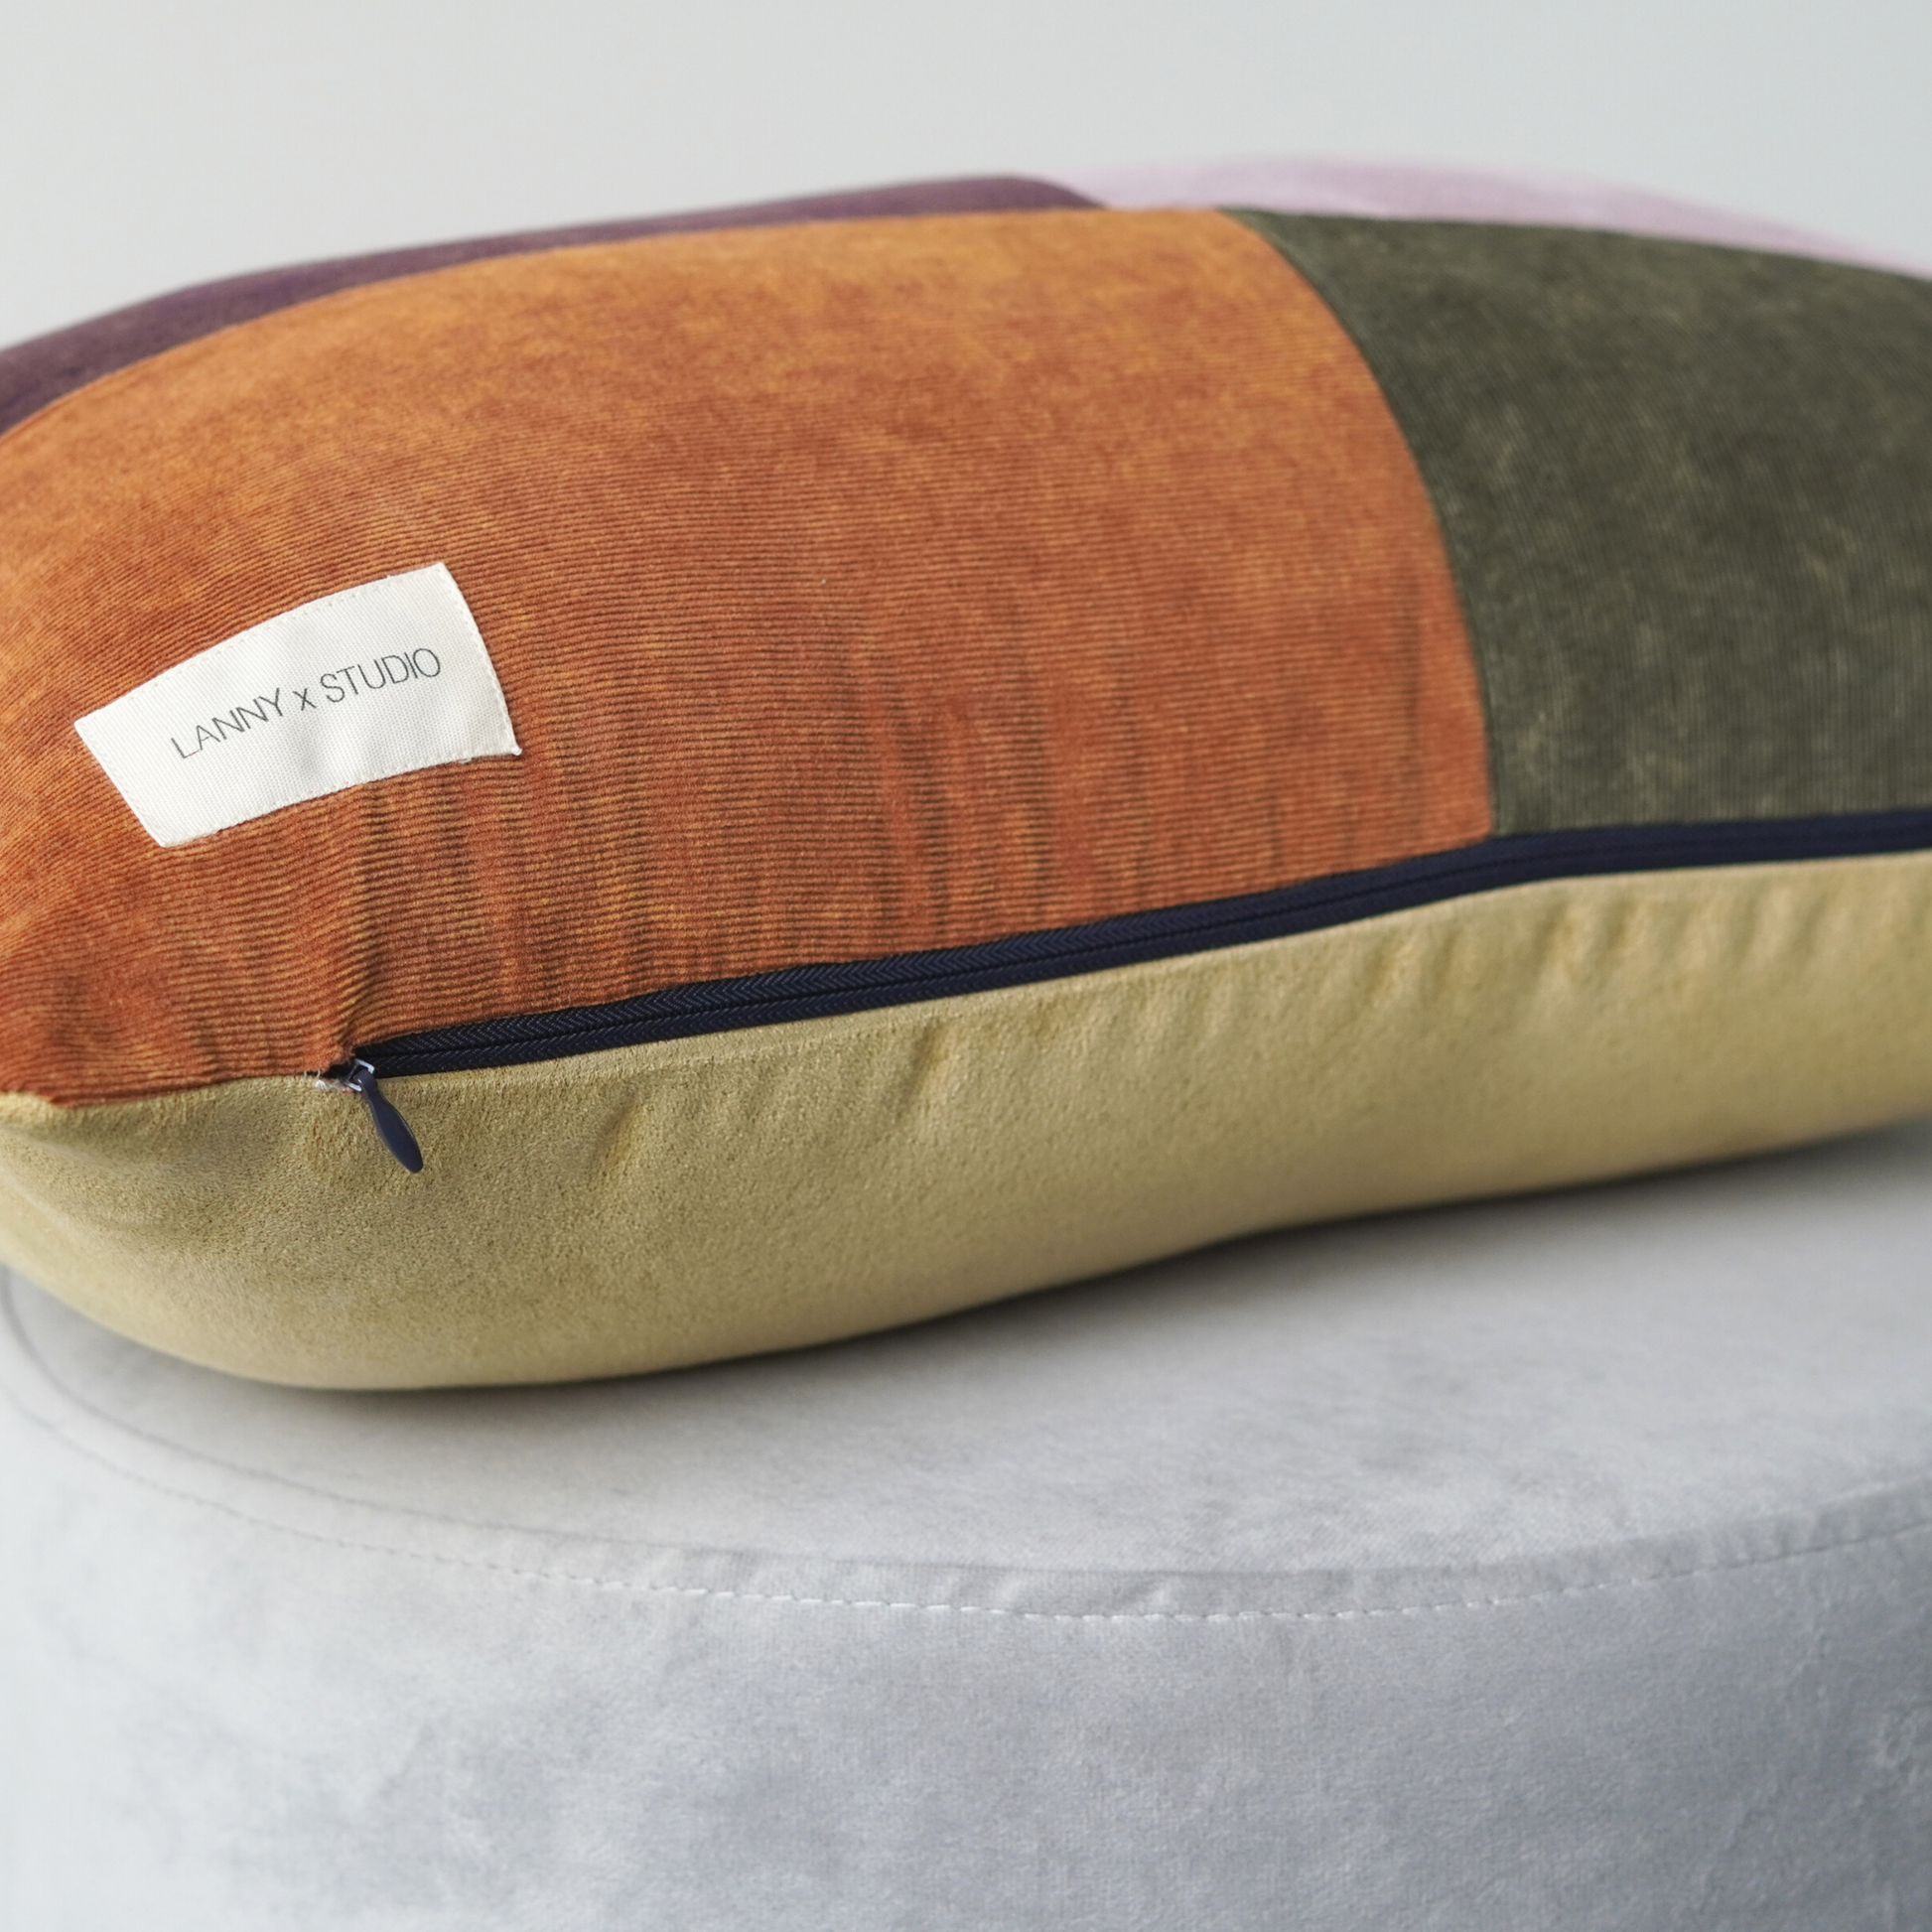 Orange, Purple, Green and Lilac panelled rentable cushion with branded LannyxStudio label. Backed in yellow suede look fabric and contrast navy zip. Close up view of zip feature. 